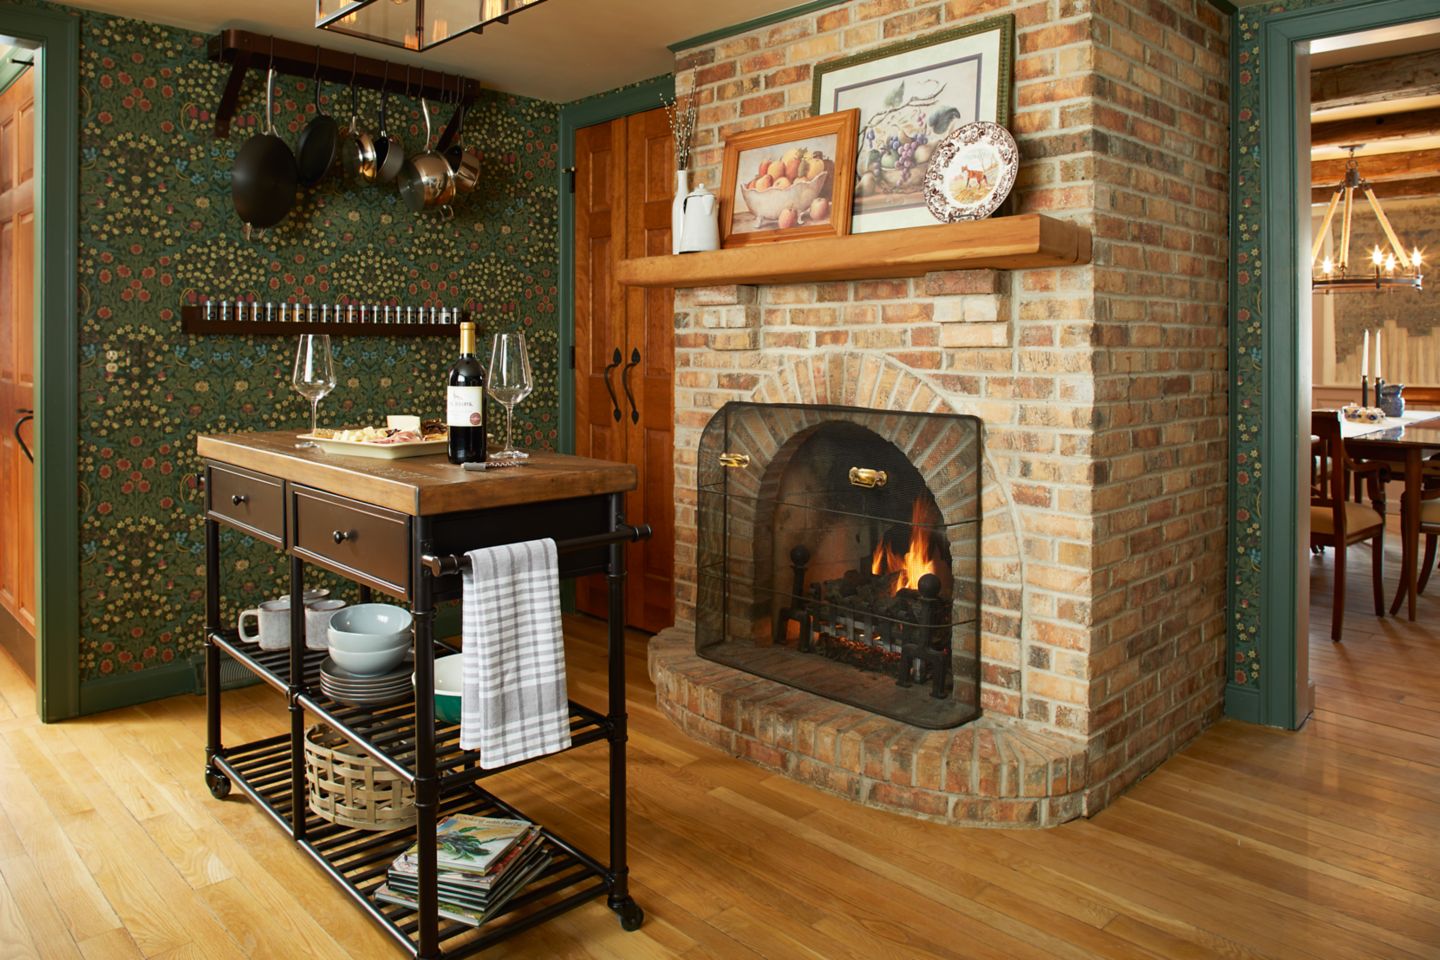 A rustic kitchen fireplace with a table in front of it holding wine and a charcuterie board